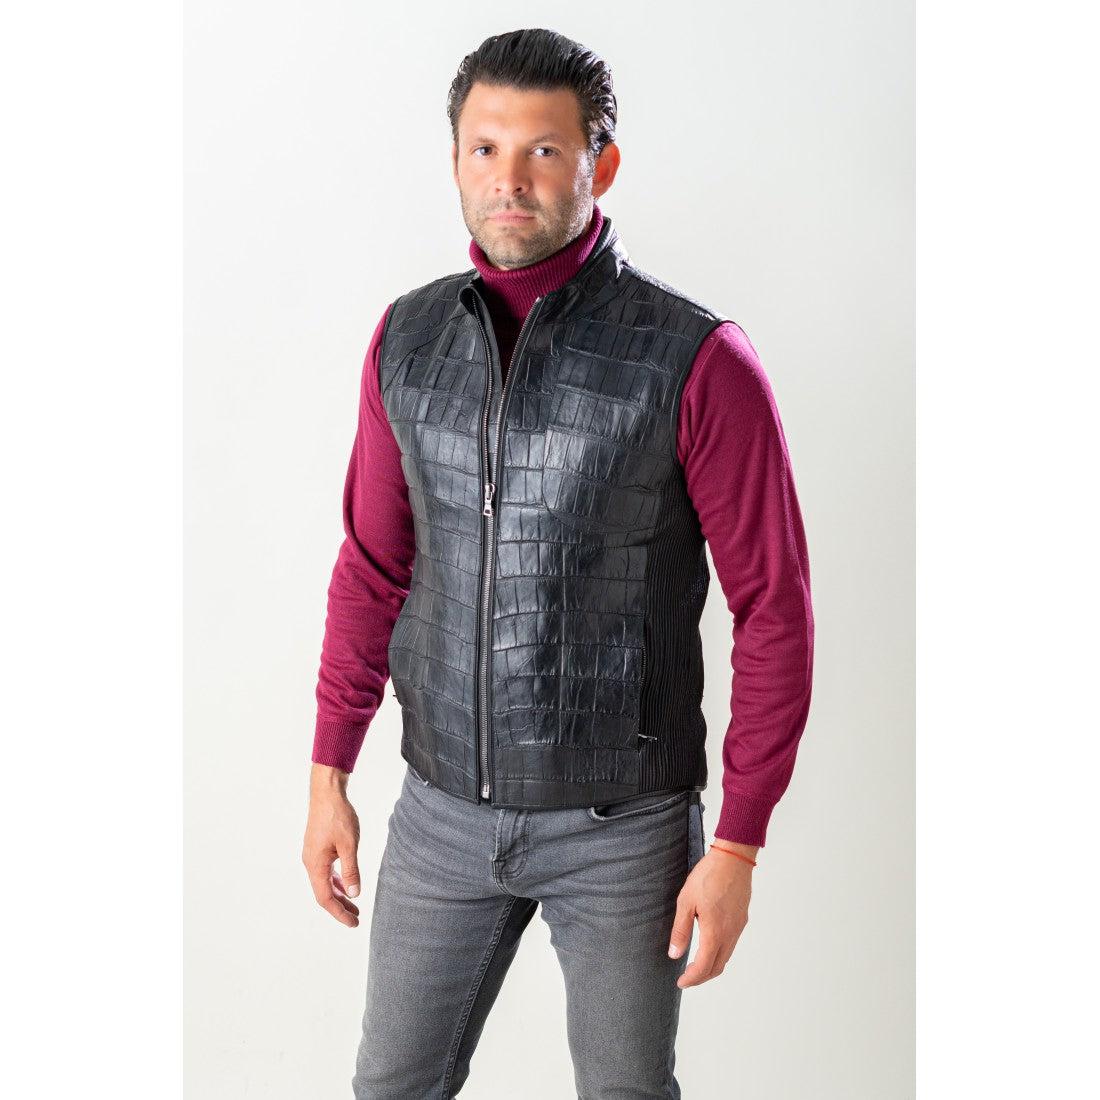 VL003G - Cuadra black casual fashion full exotic alligator leather vest for men-Kuet.us - Cuadra Boots - Western Cowboy, Casual Fashion and Dress Boots